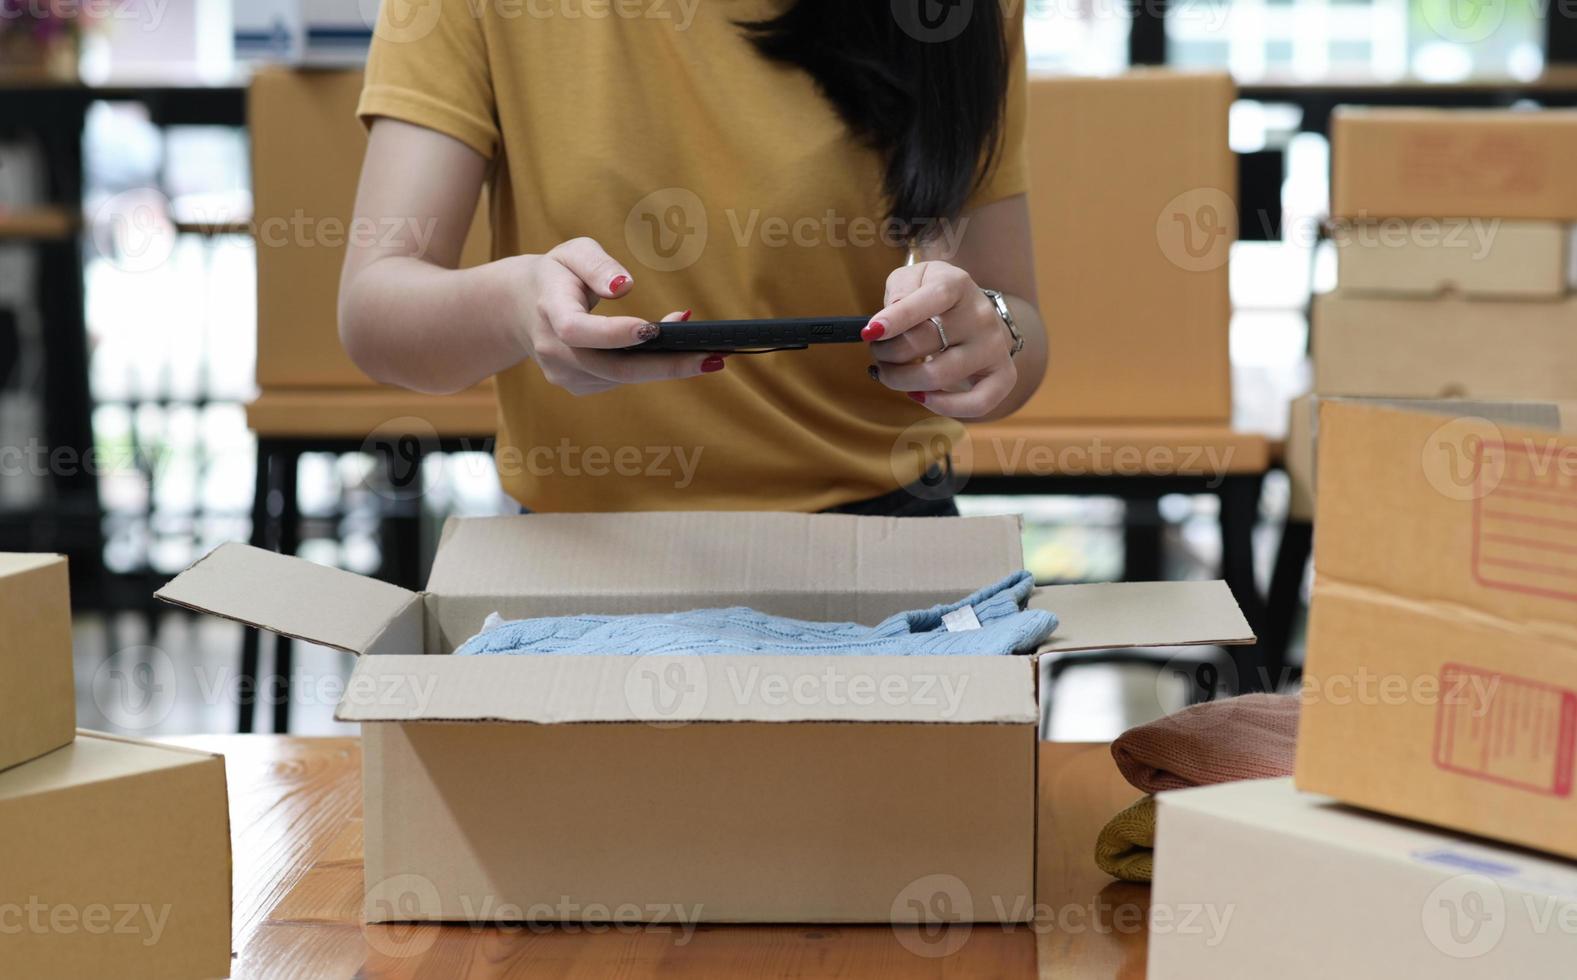 A woman selling an online product uses a smartphone to take a picture of the product in the box. photo